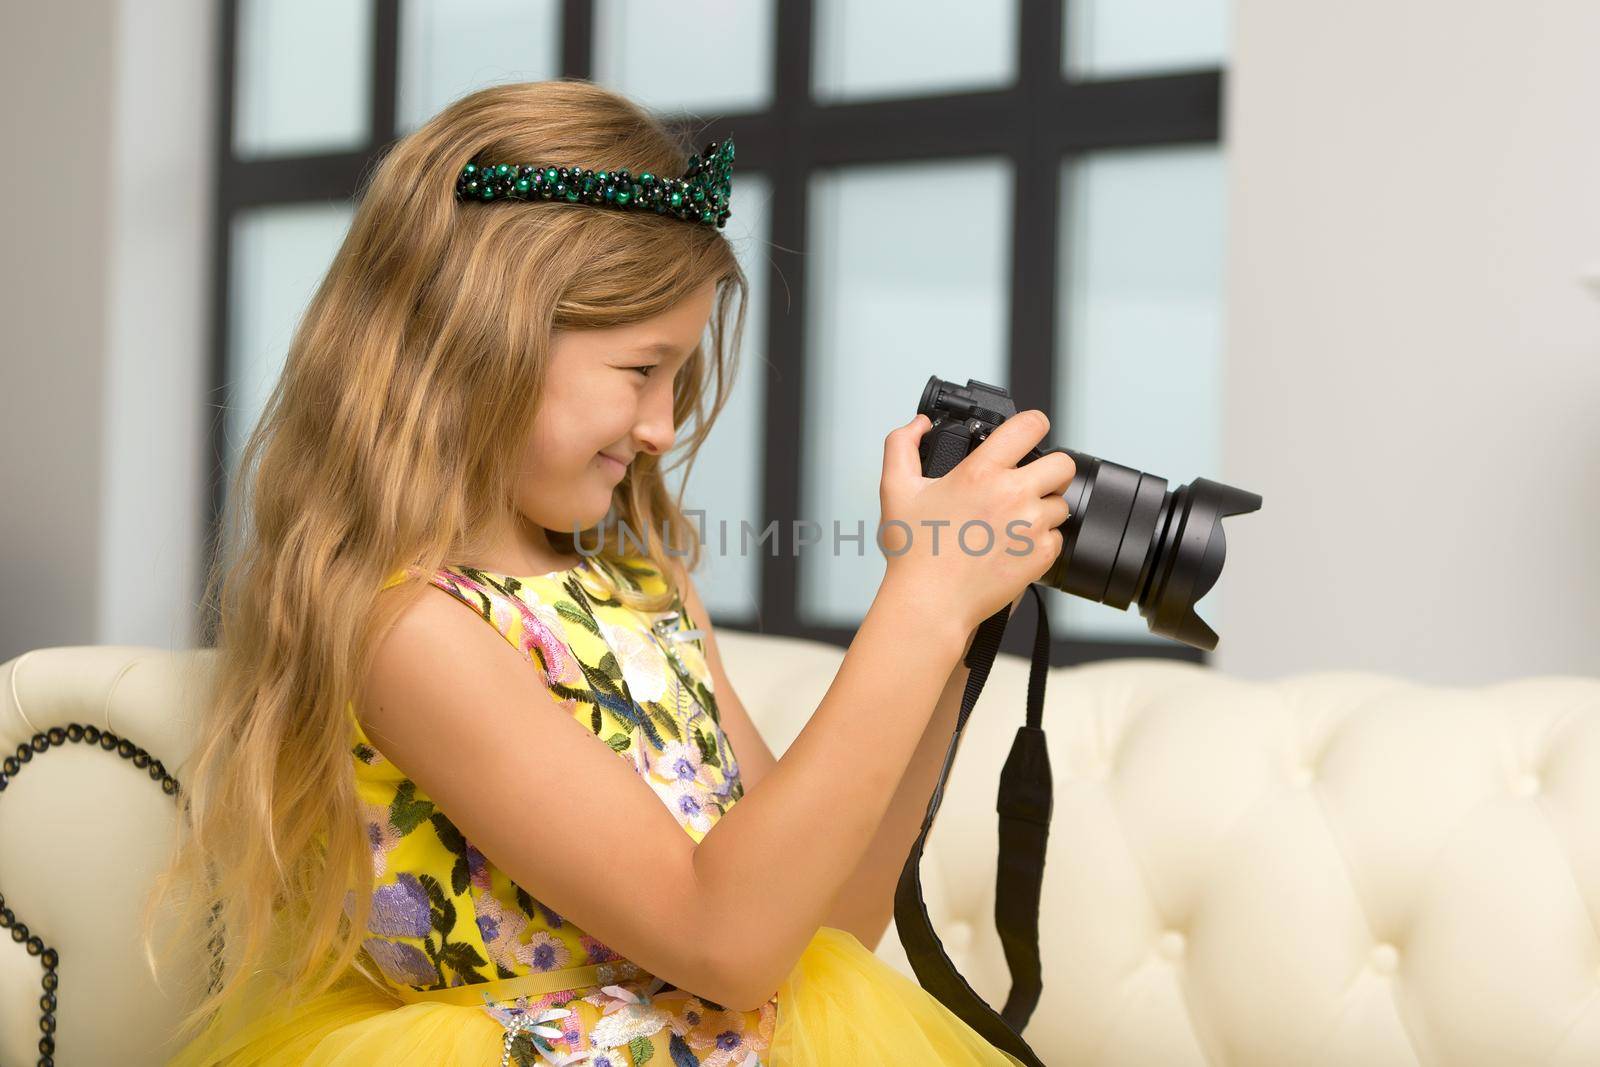 Cute little girl is studying her camera. The concept of children's creativity.